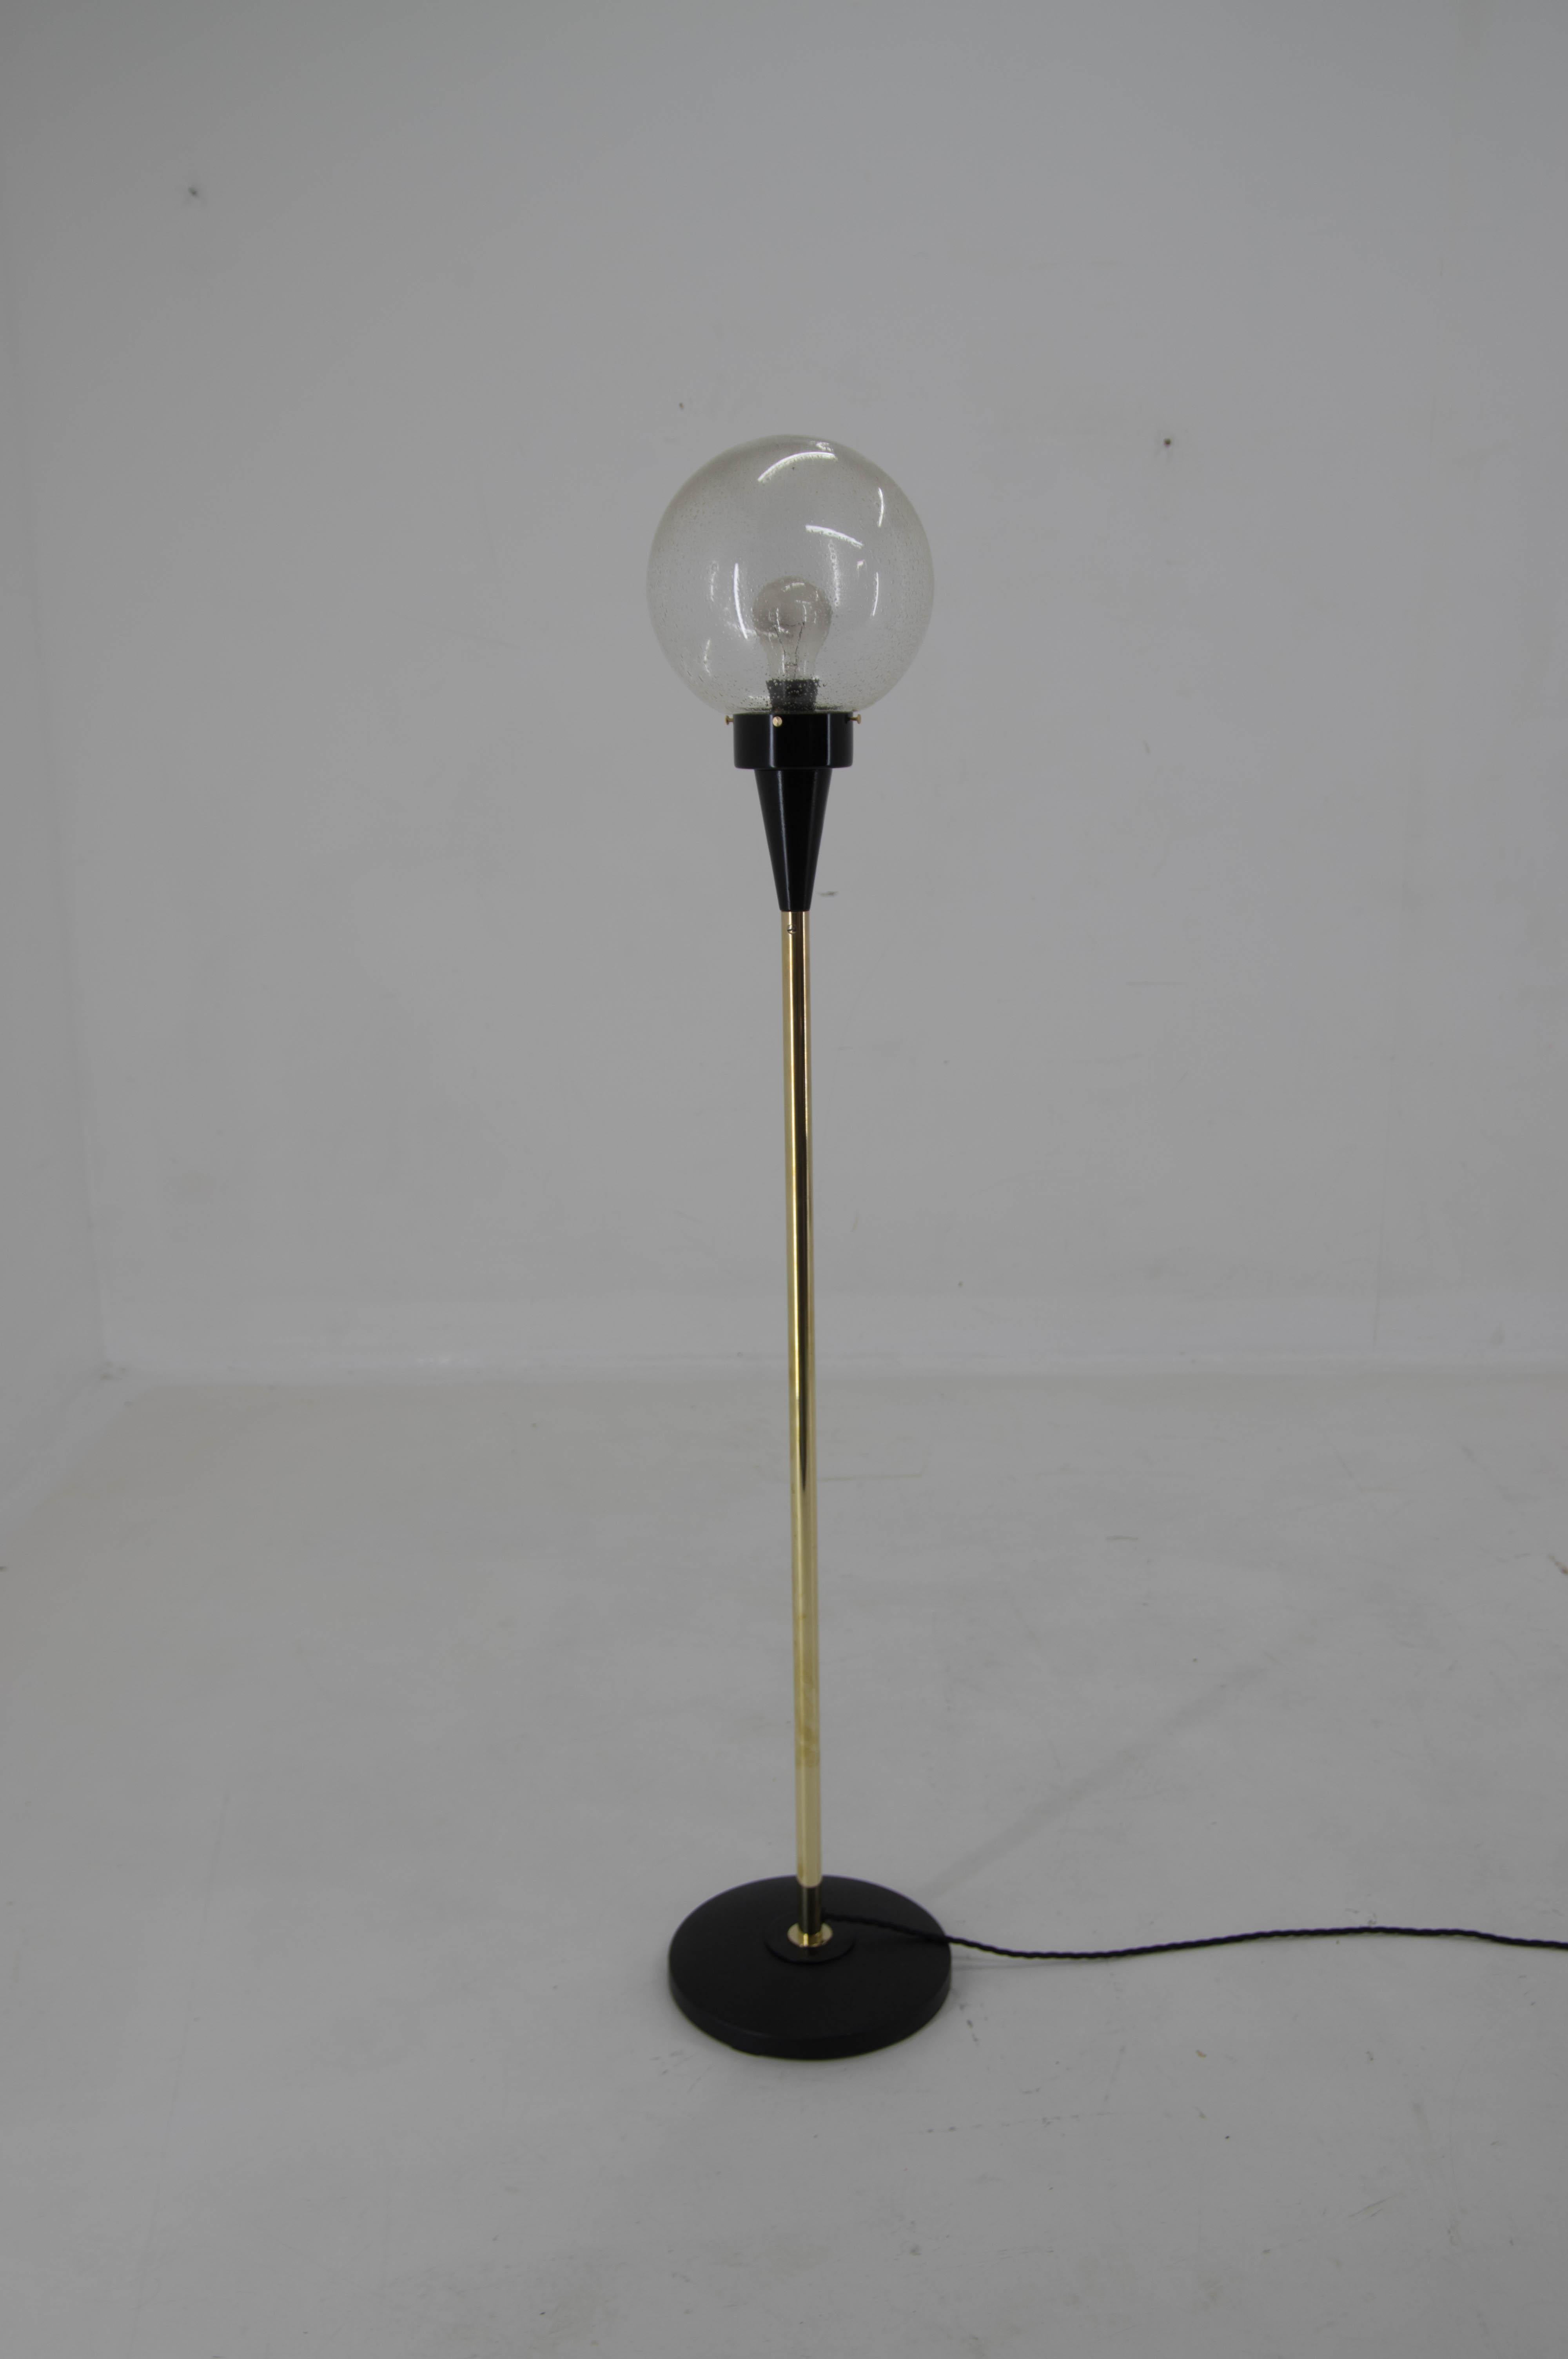 Minimalistic floor lamp made by Kamenicky Senov in Czechoslovakia in 1970s.
Restored: perfect condition.
Rewired: 1x60W, E25-E27 bulb
US plug adapter included.